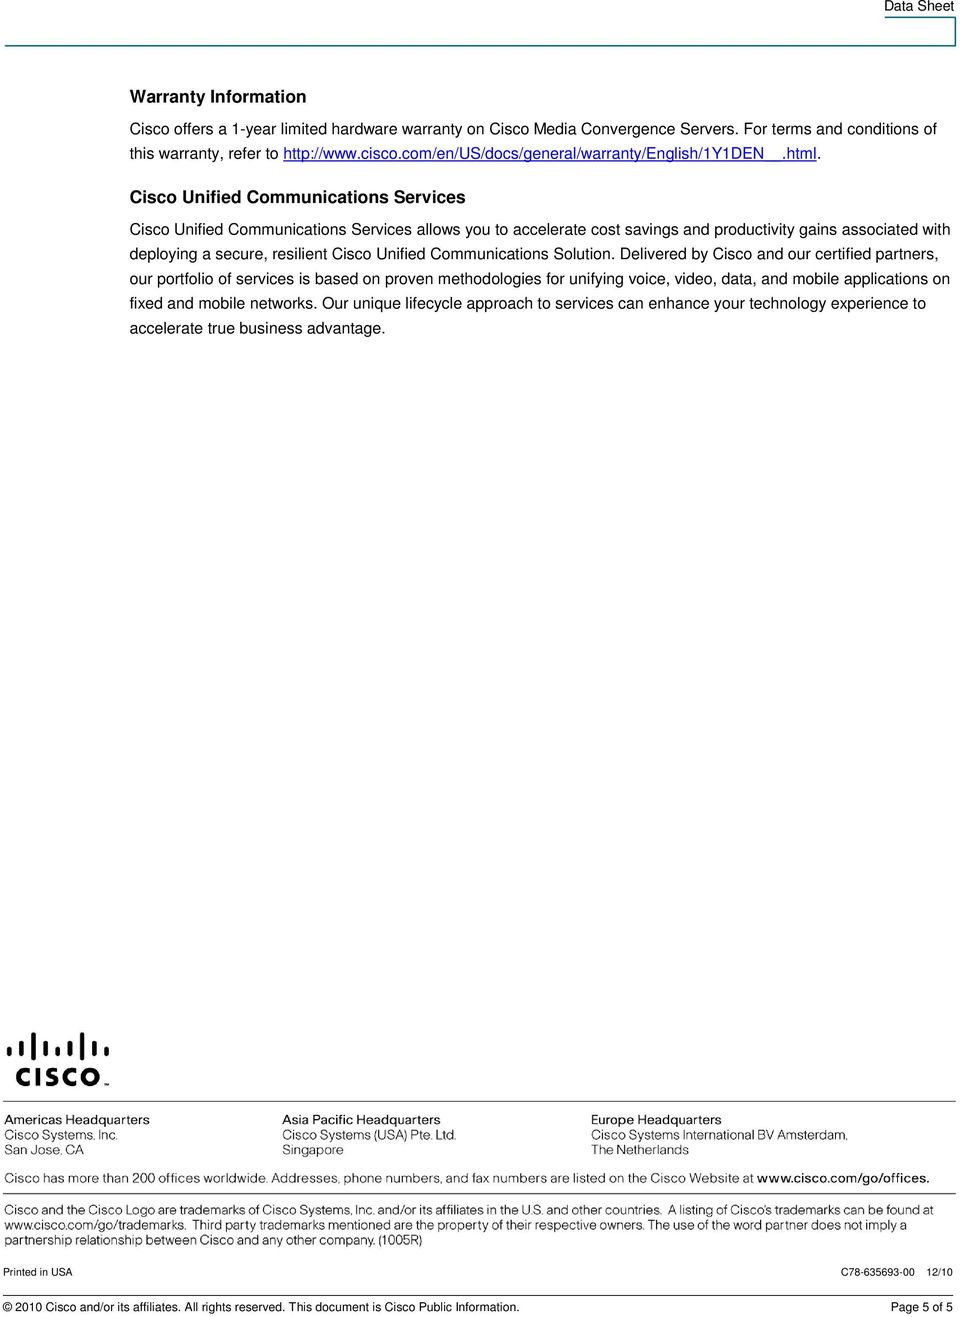 Cisco Unified Communications Services Cisco Unified Communications Services allows you to accelerate cost savings and productivity gains associated with deploying a secure, resilient Cisco Unified